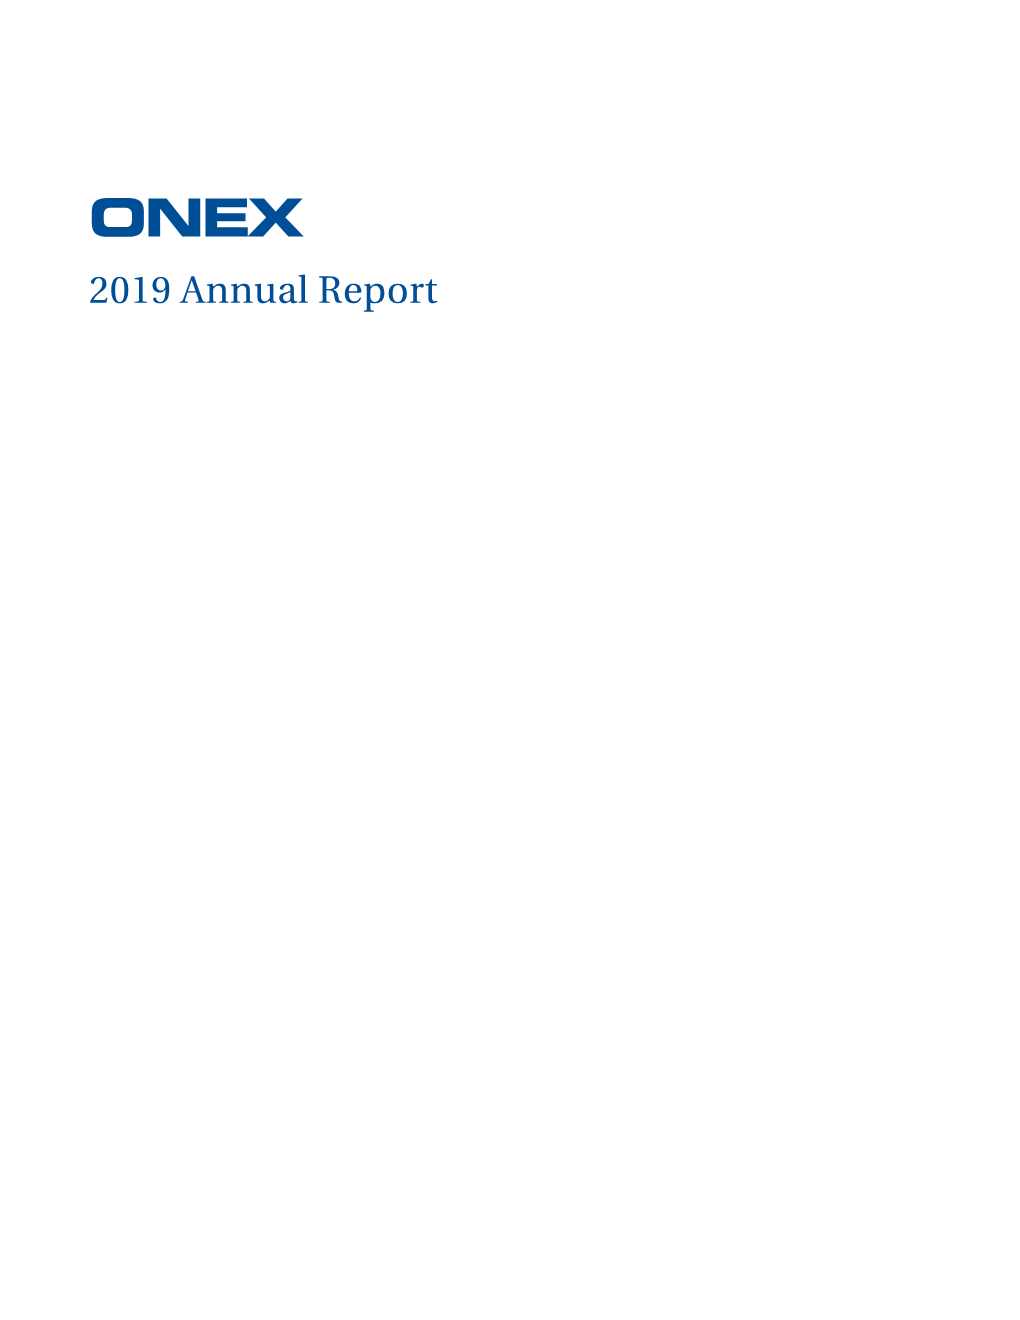 2019 Annual Report CHAIRMAN’S LETTER